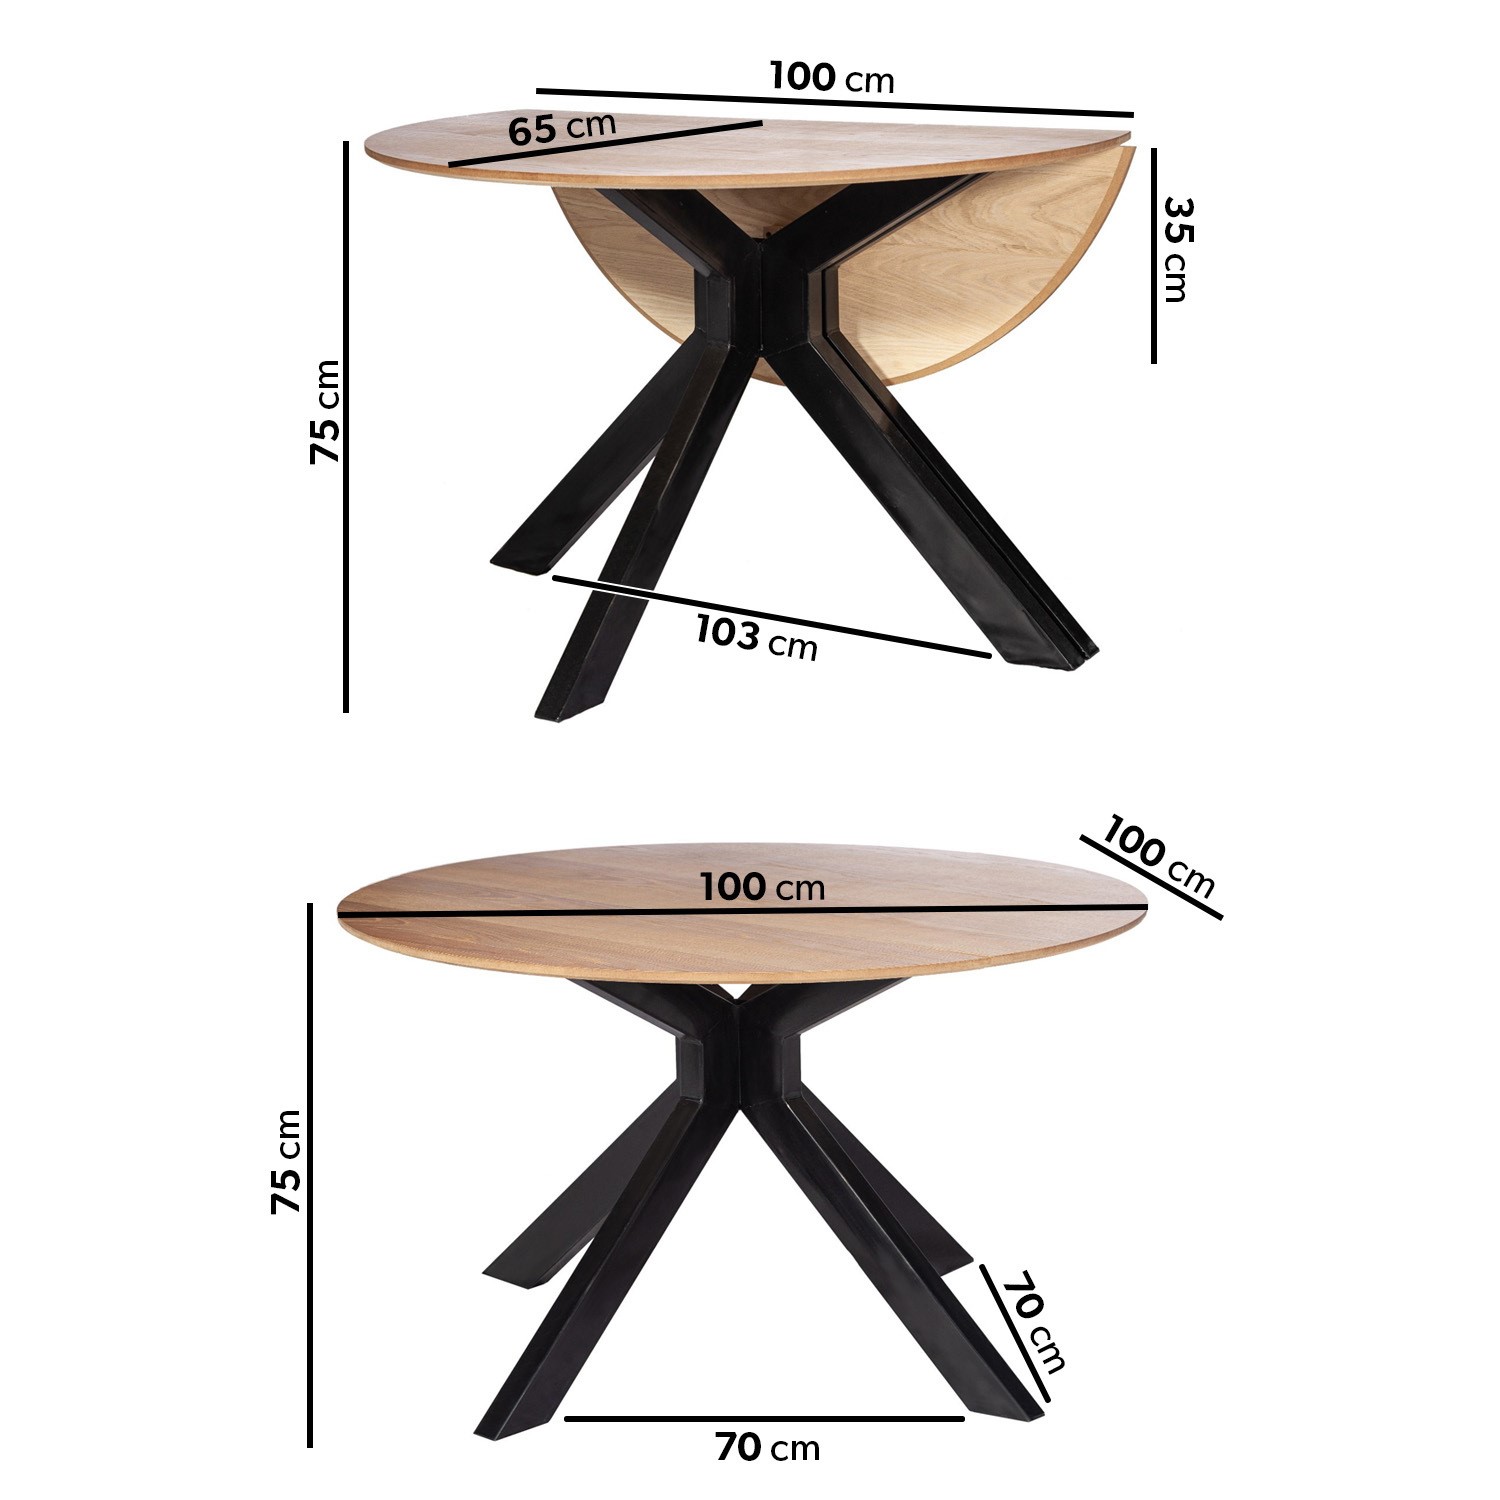 Round Light Oak Drop Leaf Dining Table, Round Oak Tables With Leaves